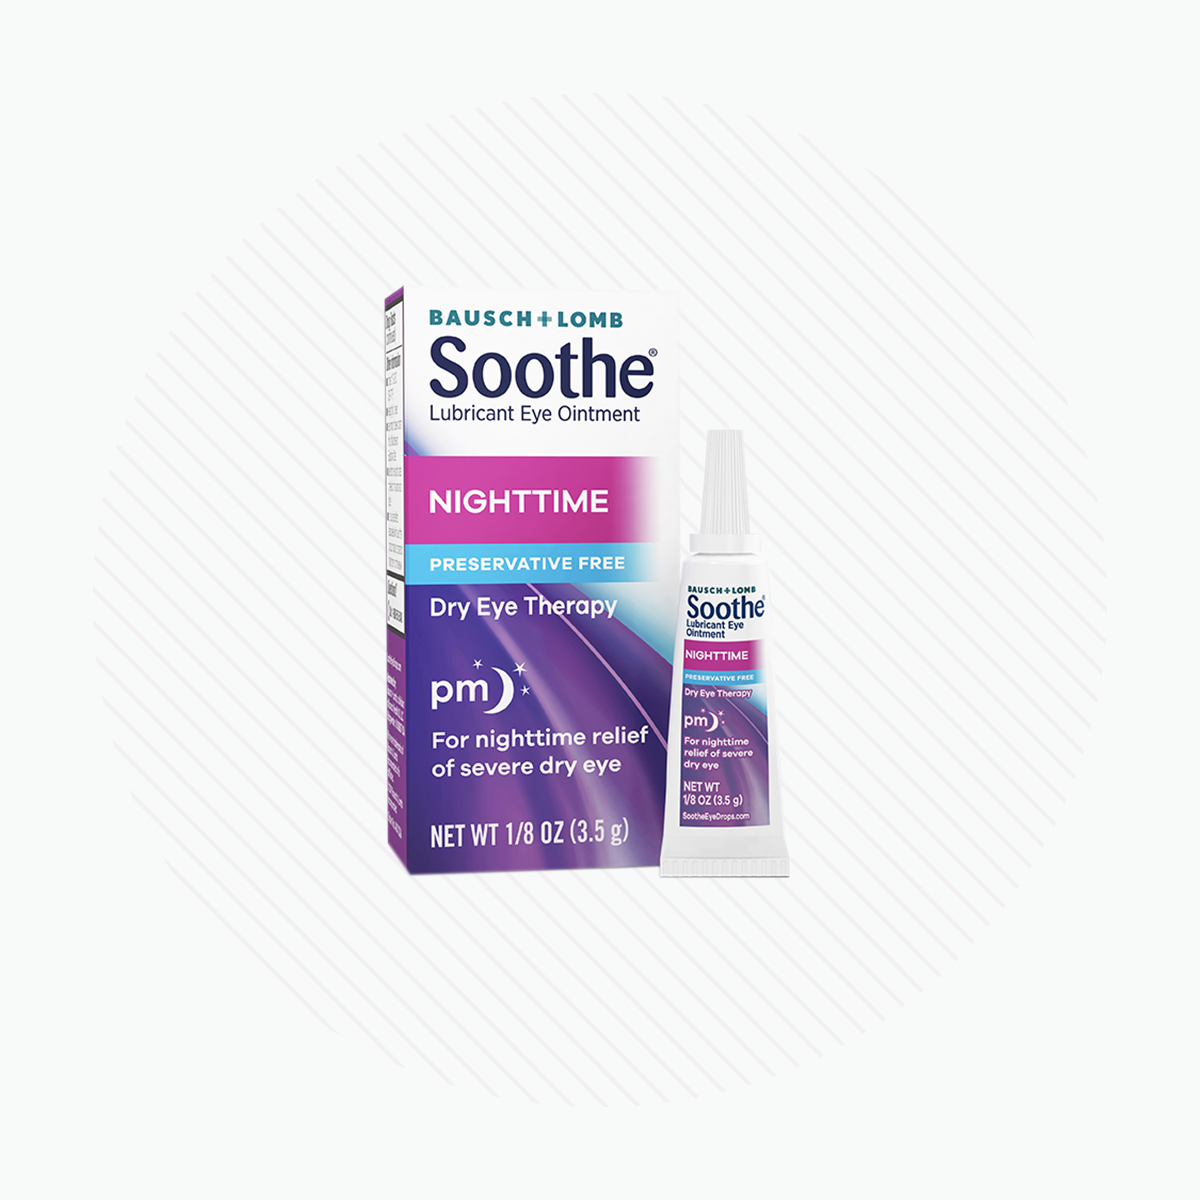 Soothe Eye Ointment by Bausch & Lomb, Lubricant Relief for Dry Eyes, Nighttime Dry Eye Therapy, Sensitive Eyes, Preservative Free, (1.8 Oz tube)